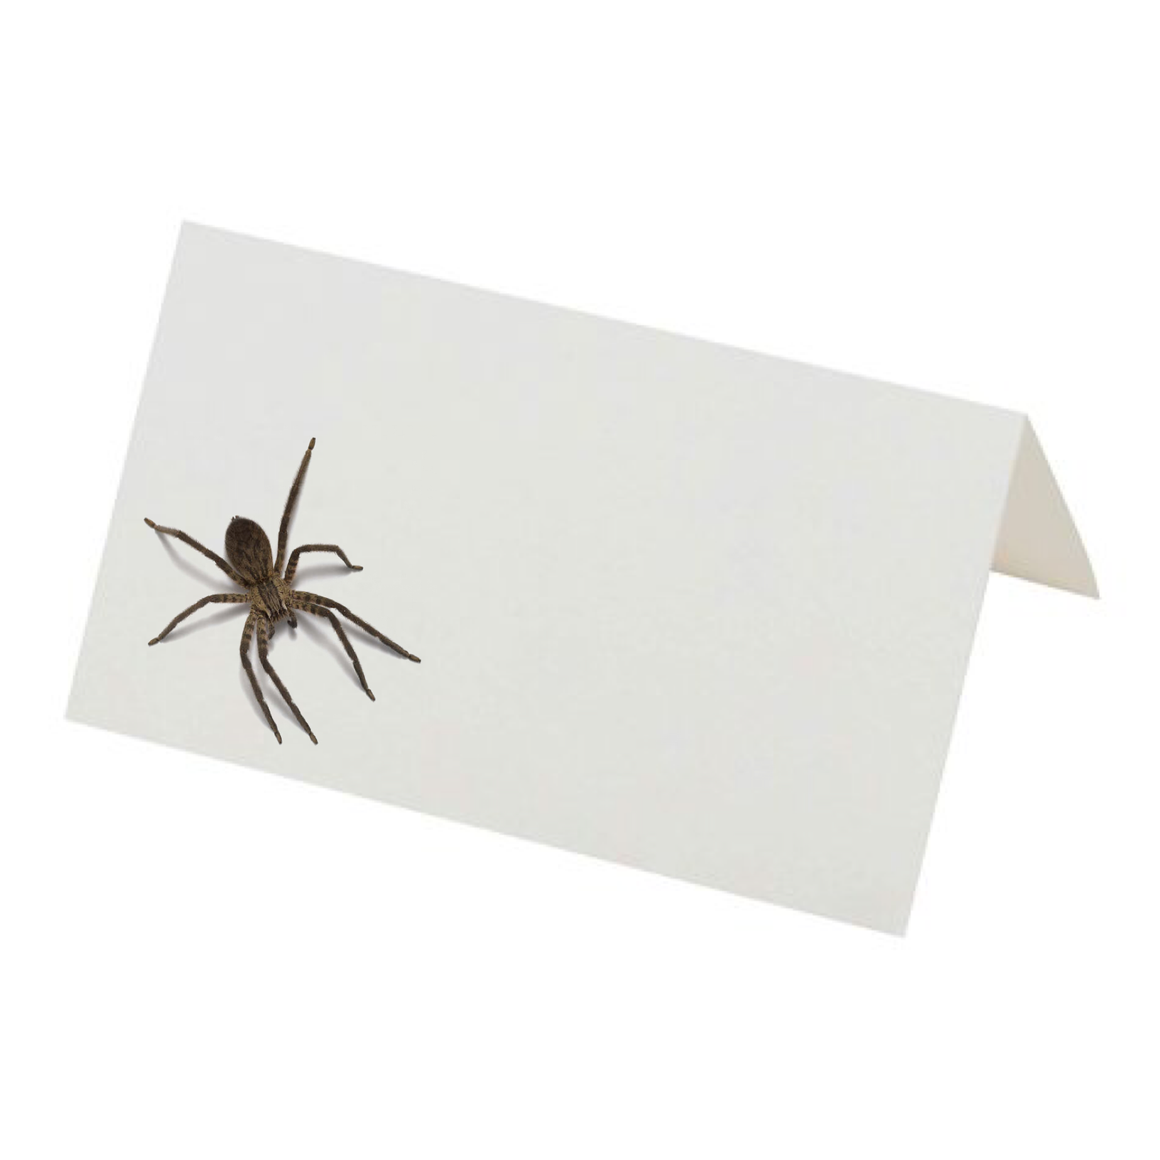 TENT PLACE CARDS - SPIDER